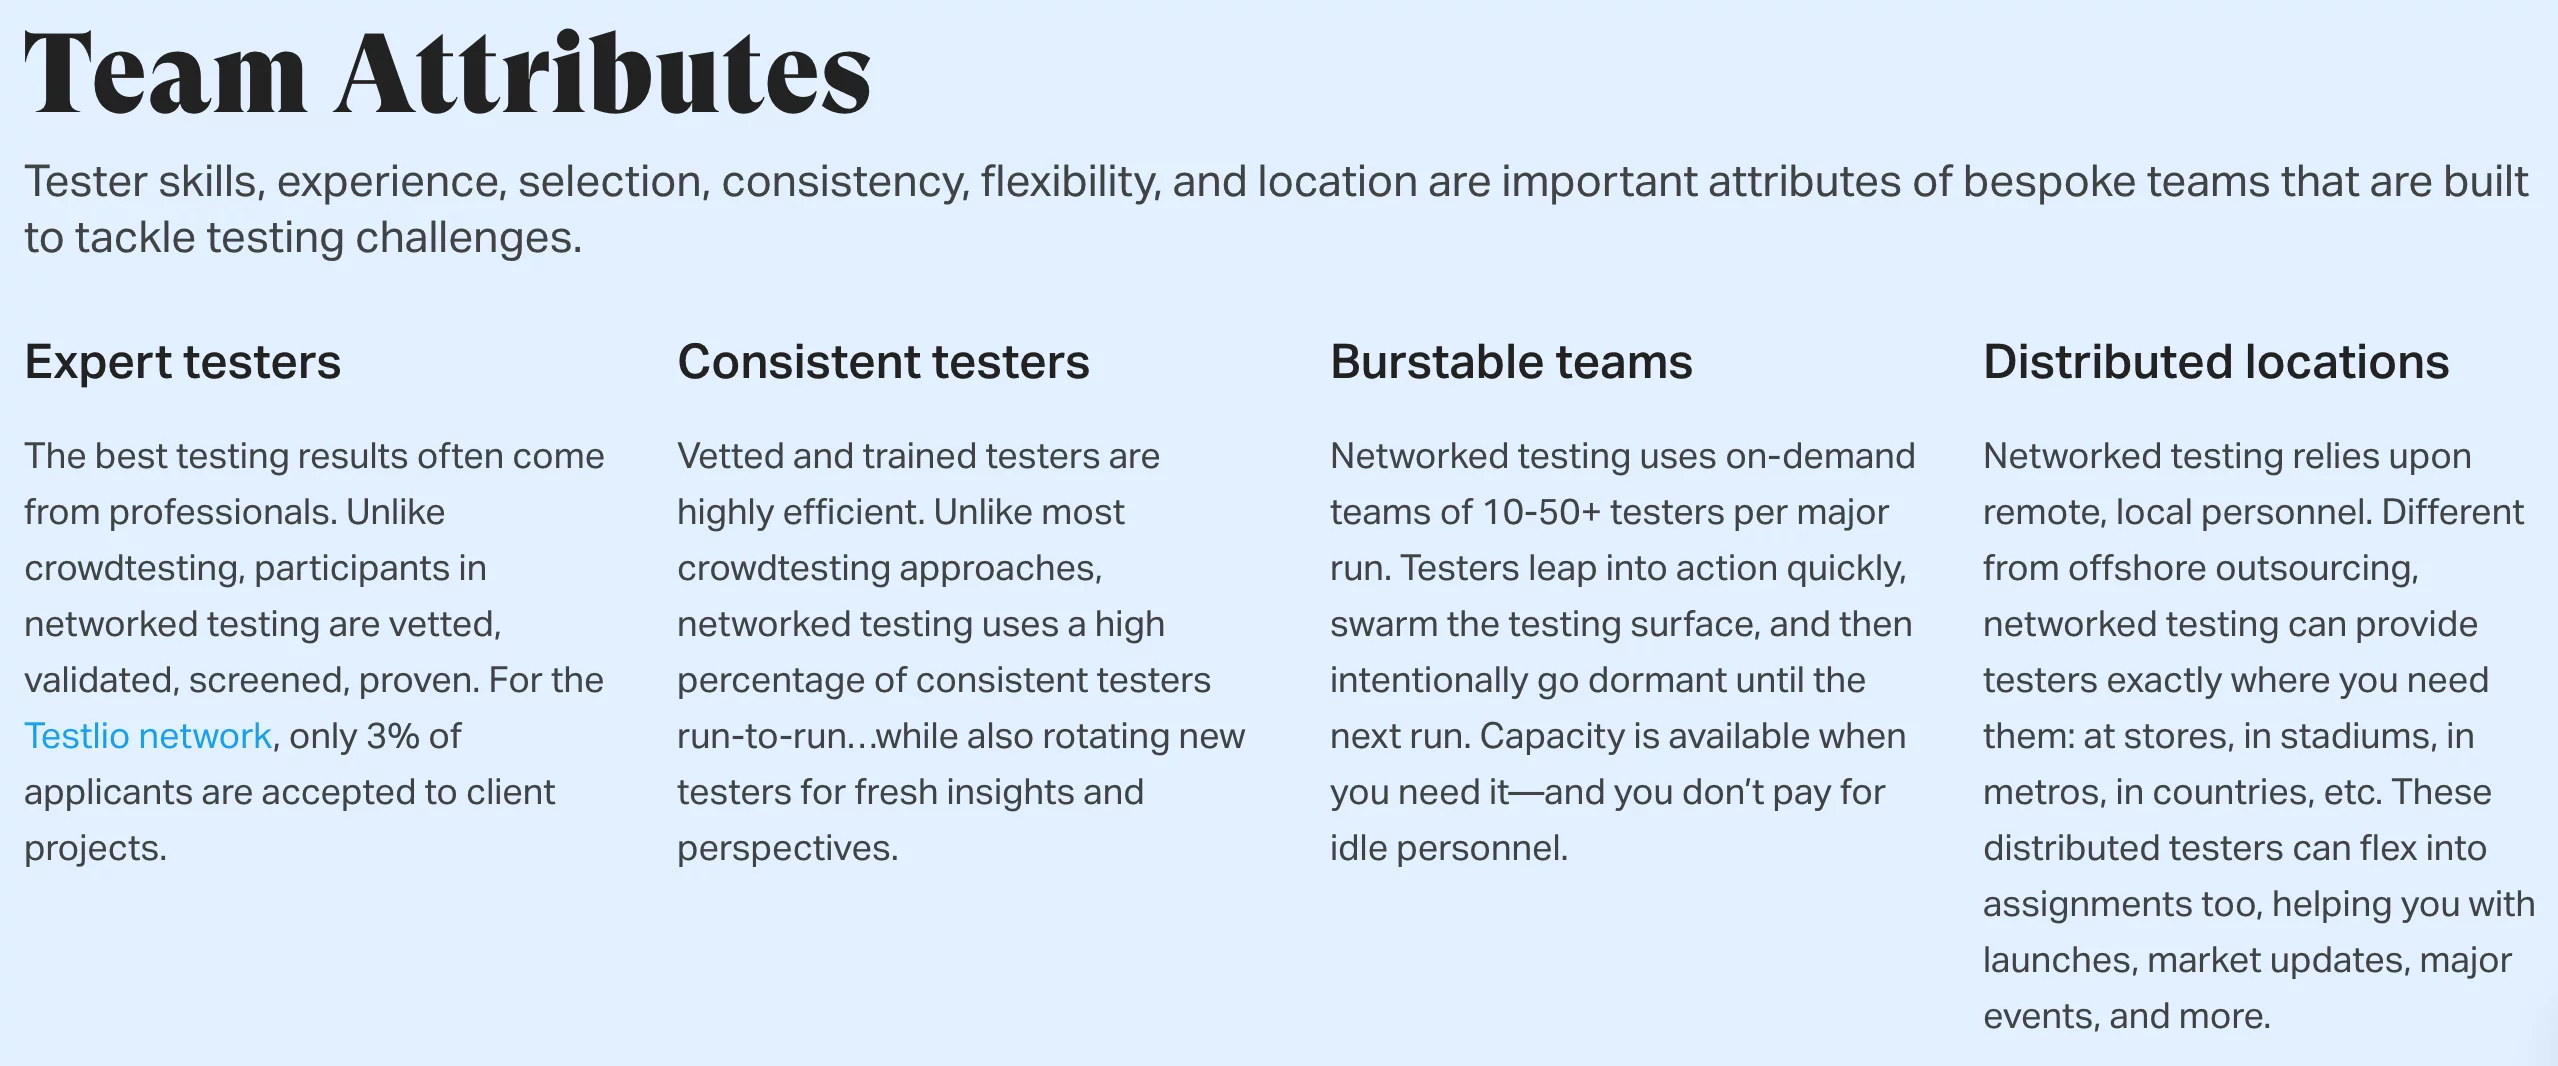 Tester skills, experience, selection, consistency, flexibility, and location are important attributes of networked testing